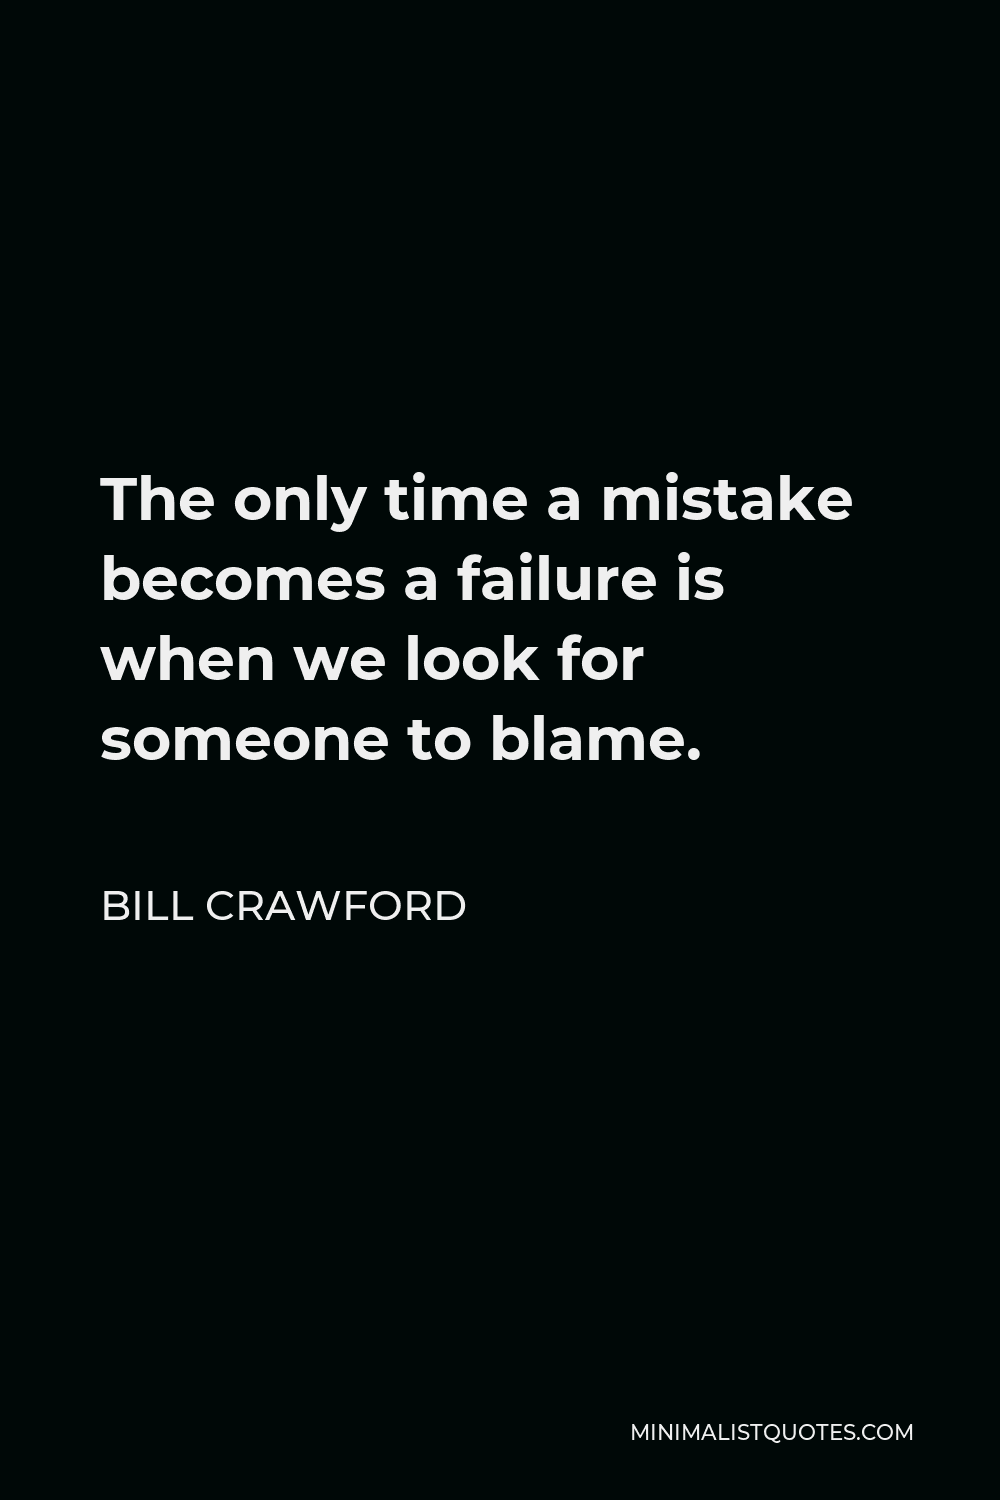 Bill Crawford Quote - The only time a mistake becomes a failure is when we look for someone to blame.